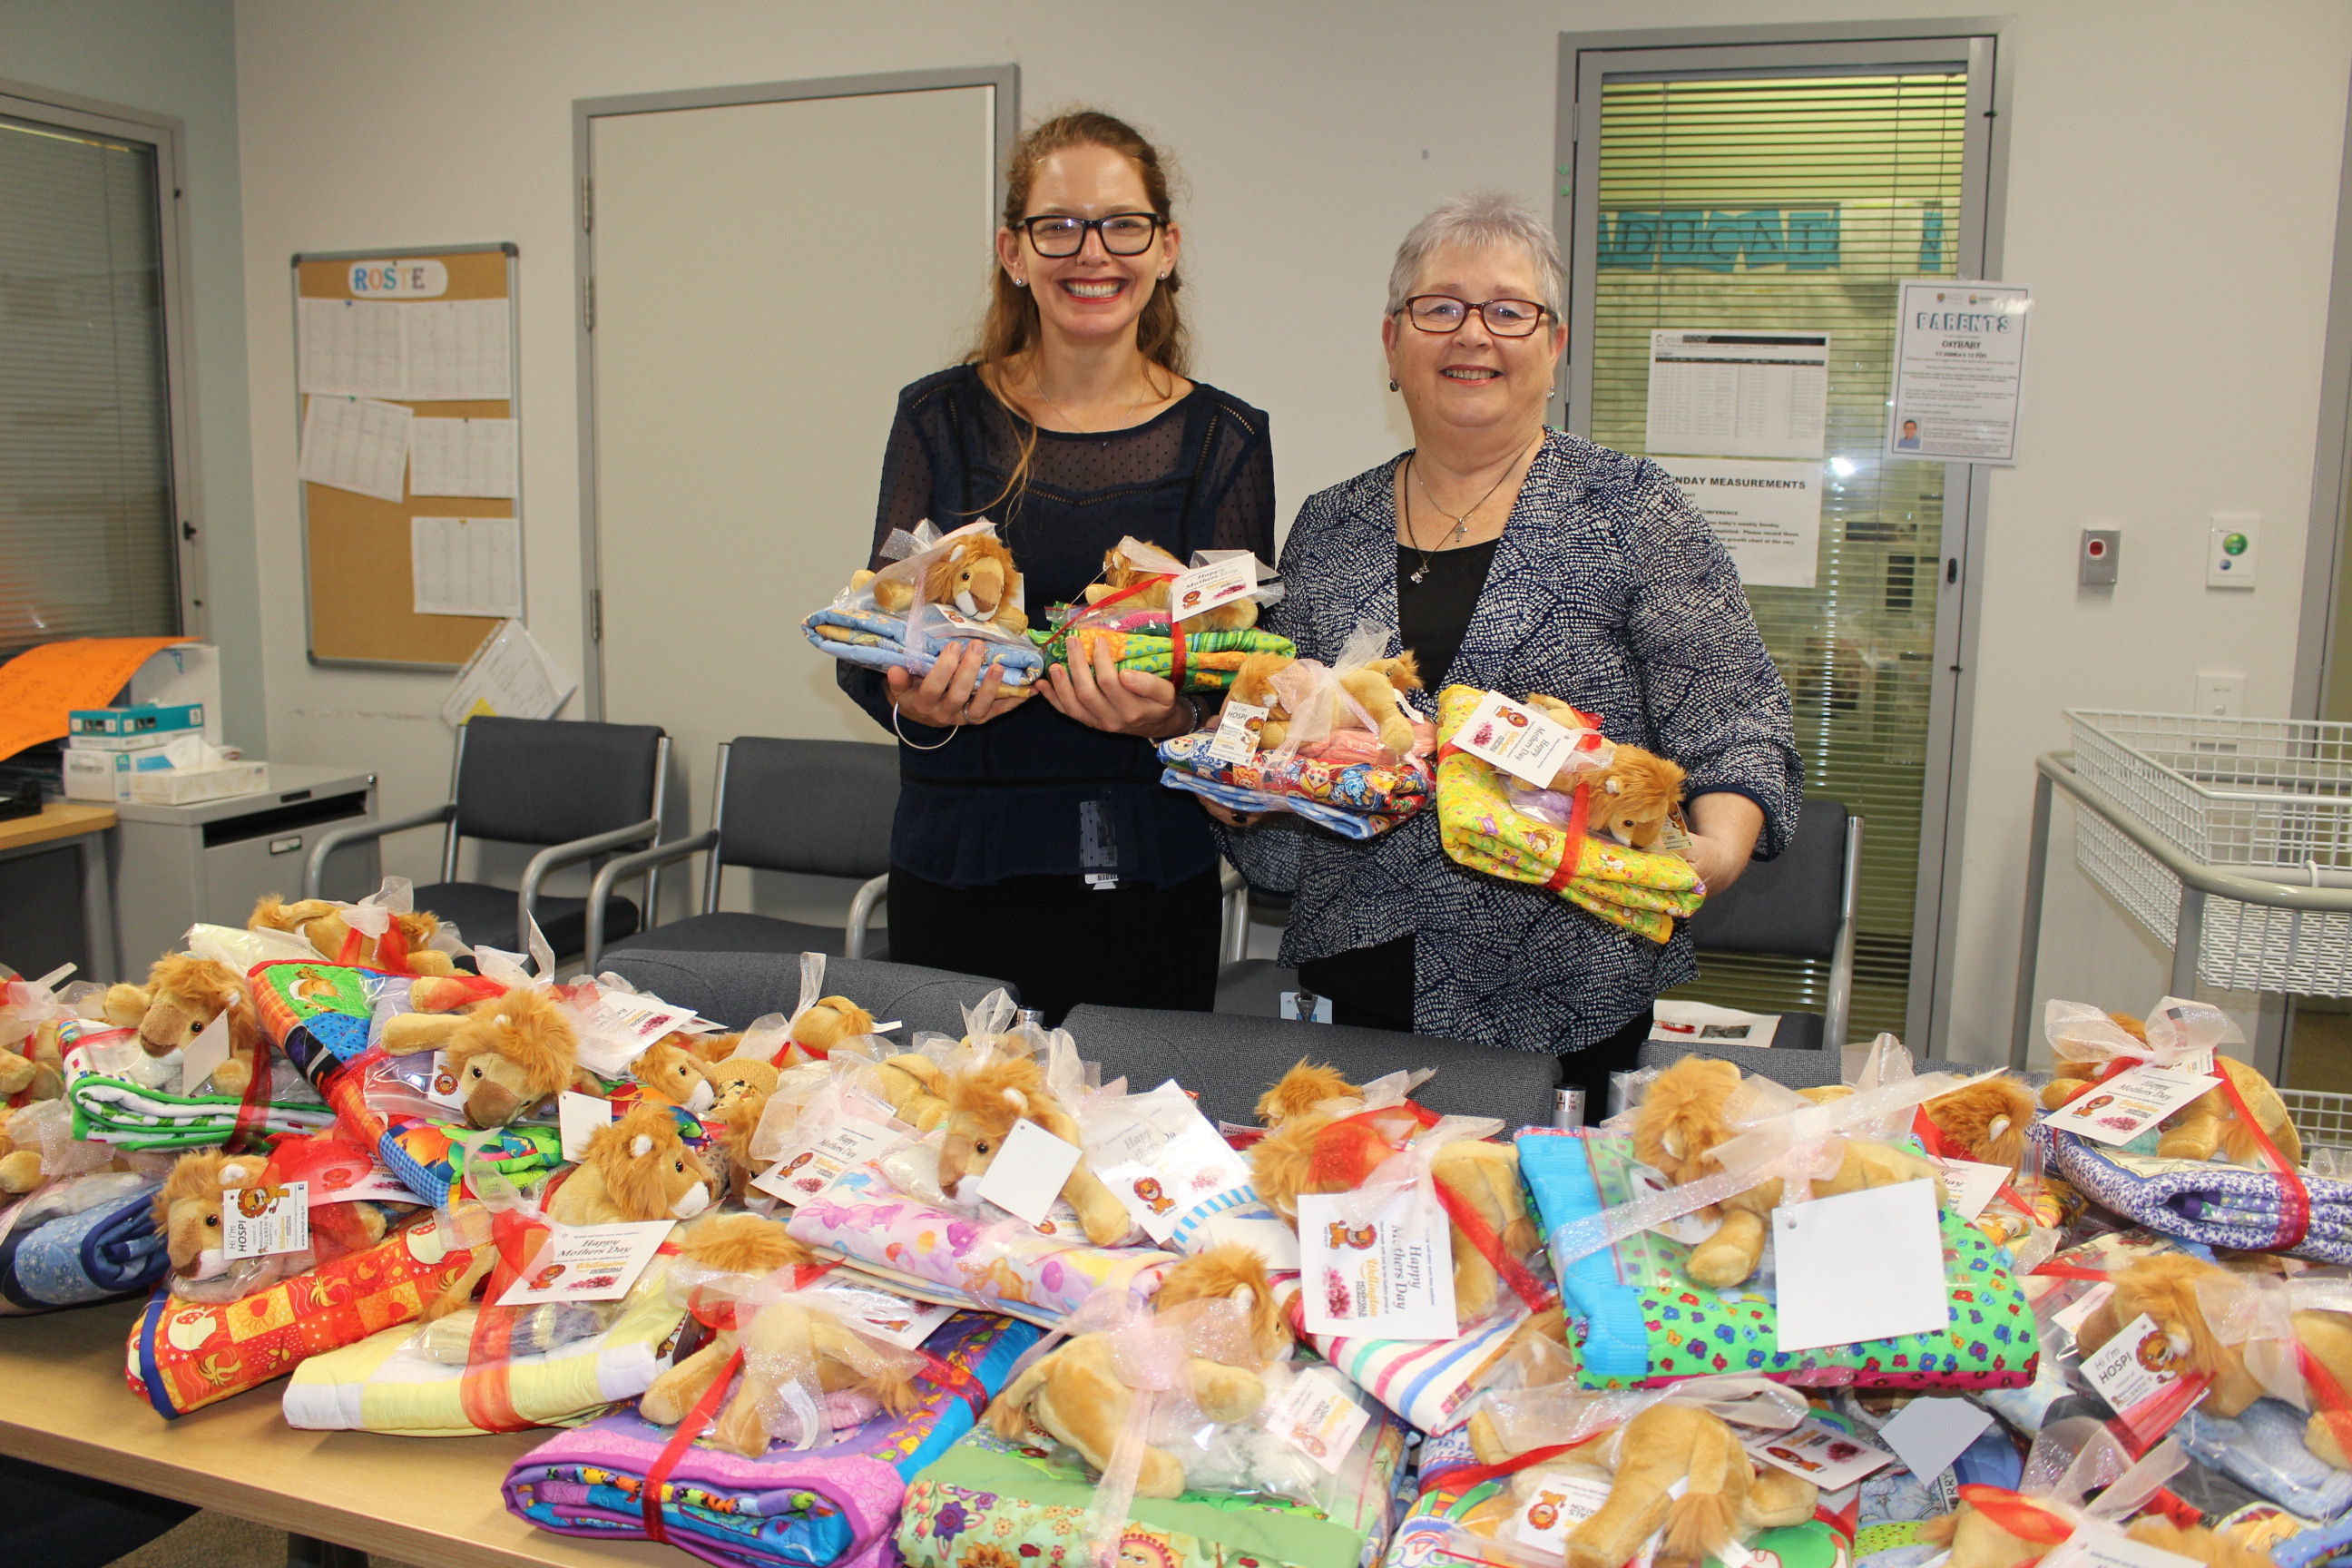 Deb Davenport (Acting Charge Nurse Manager at Wellington Neonatal Intensive Care Unit) with Trish Lee (Volunteer Manager at Wellington Hospitals Foundation) with the Mother’s Day gift packs.